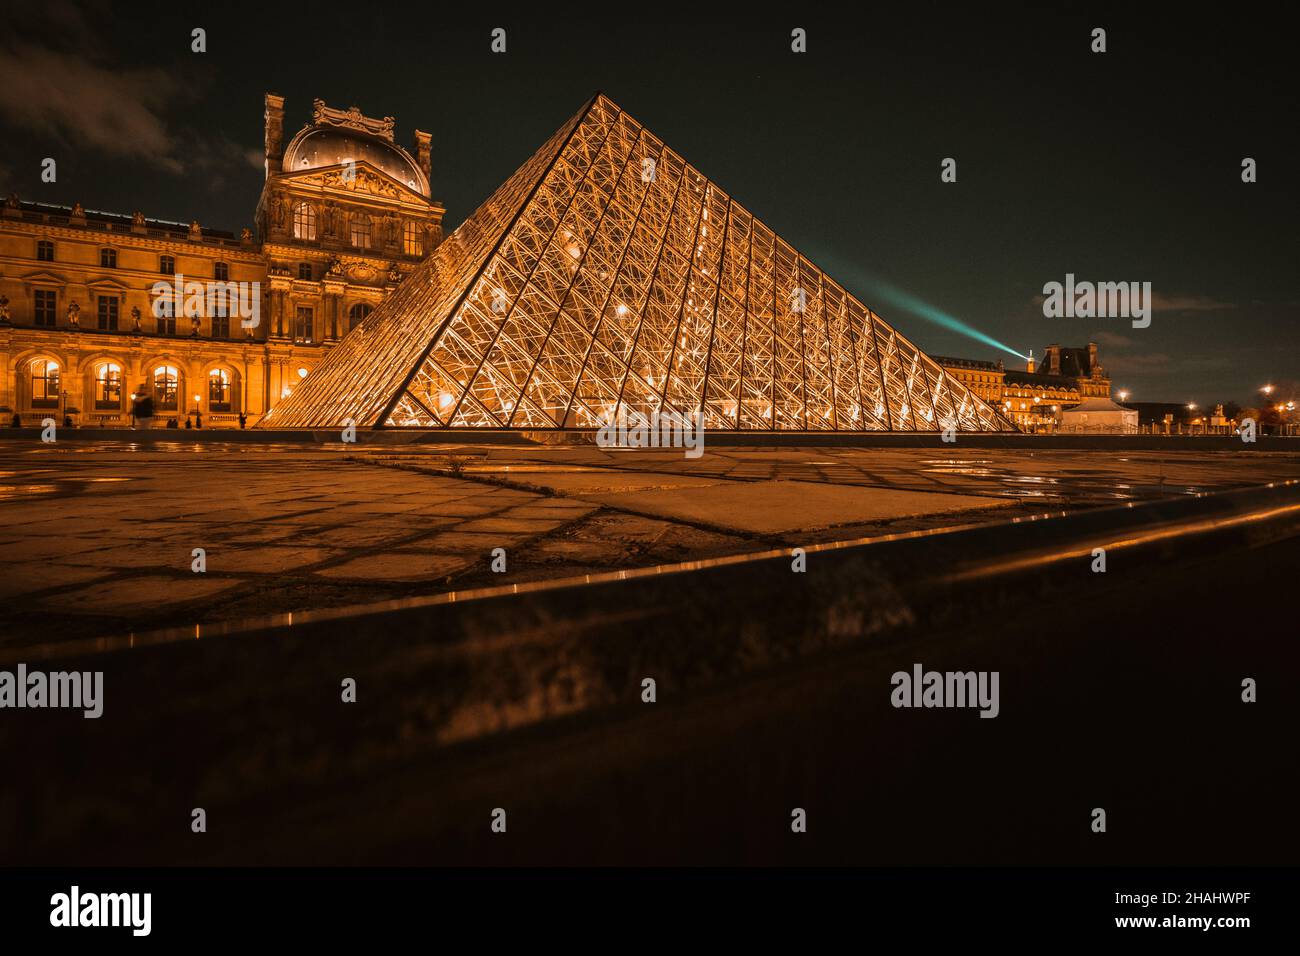 The Louvre Pyramid shines at night in Paris, France. The museum is housed in the Louvre Palace (Palais du Louvre) Stock Photo